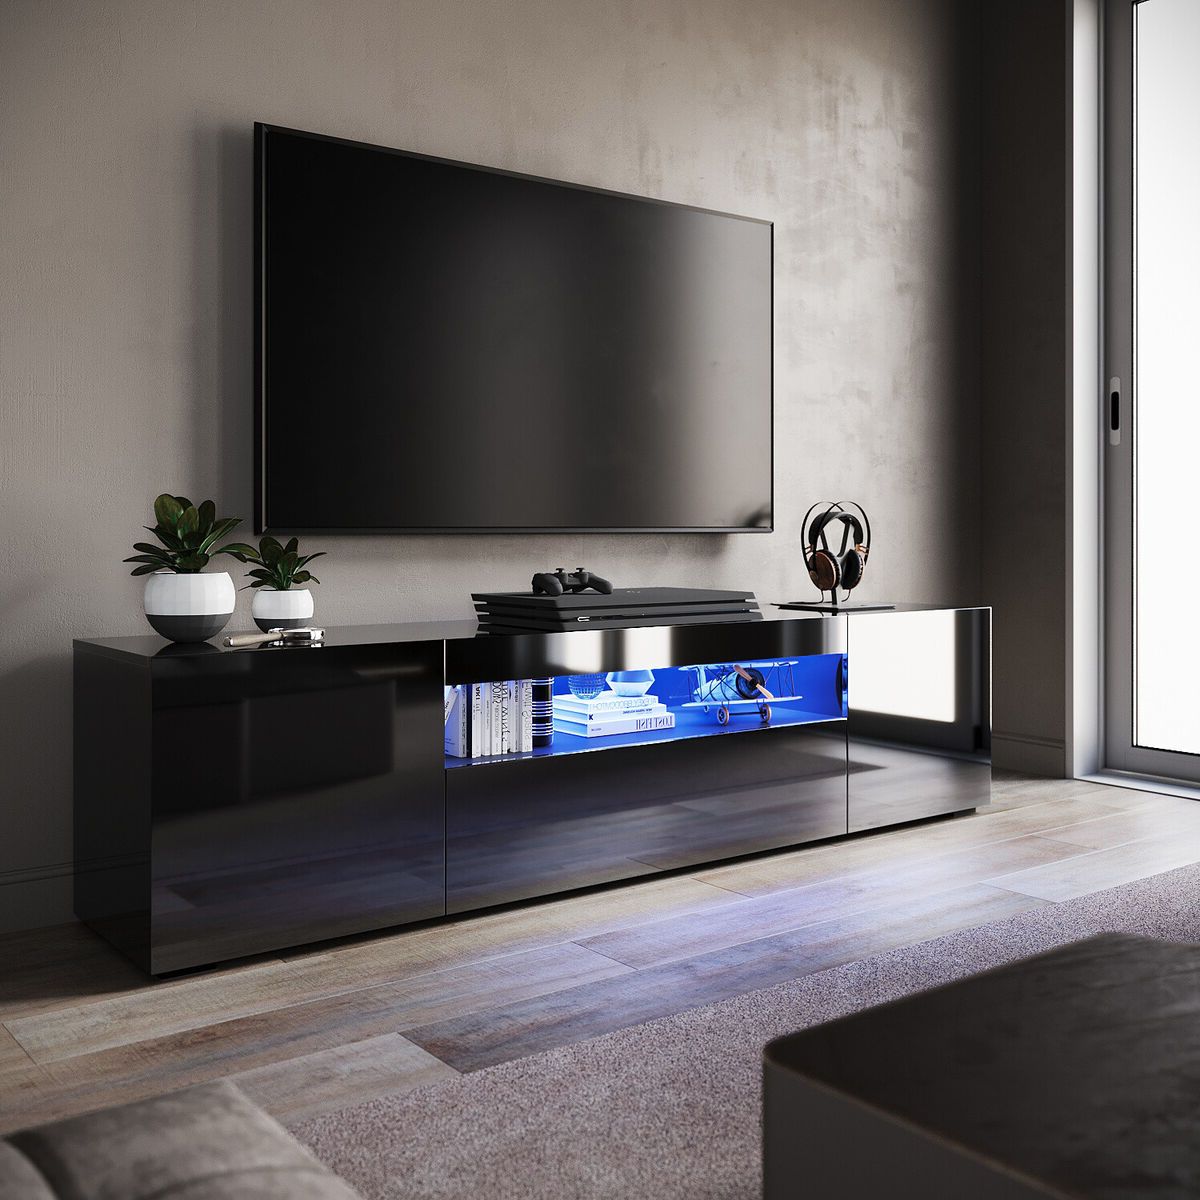 200cm High Gloss Tv Stand Black Cabinet Unit Doors Storage With Rgb Led  Cupboard | Ebay Intended For Rgb Tv Entertainment Centers (Gallery 10 of 20)